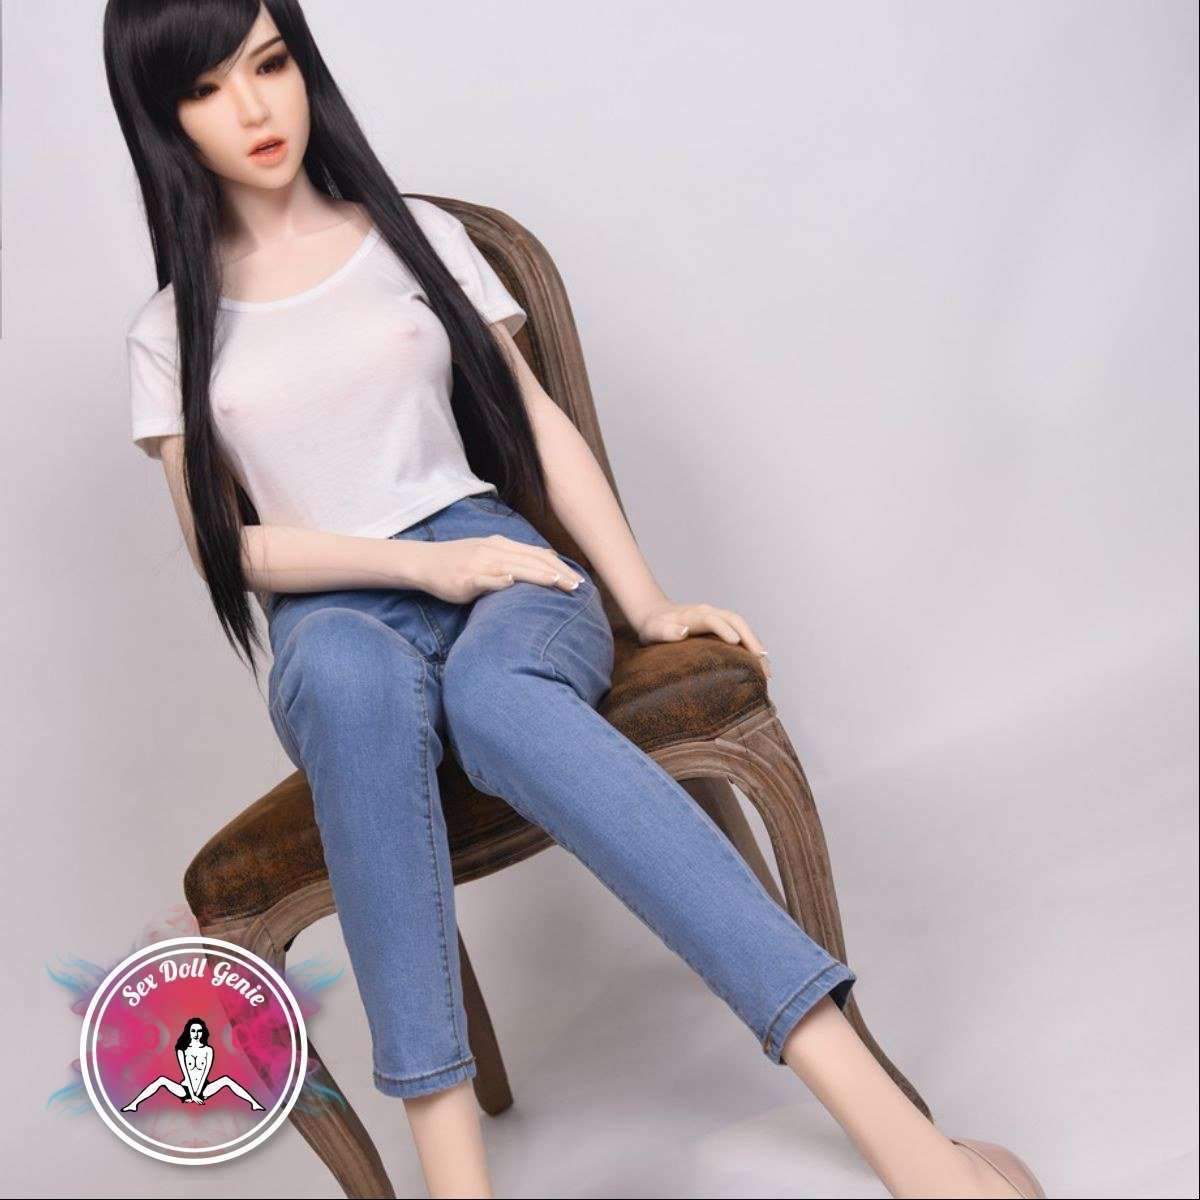 DS Doll - 163Plus - Kayla Head - Type 2 D Cup Silicone Doll-5